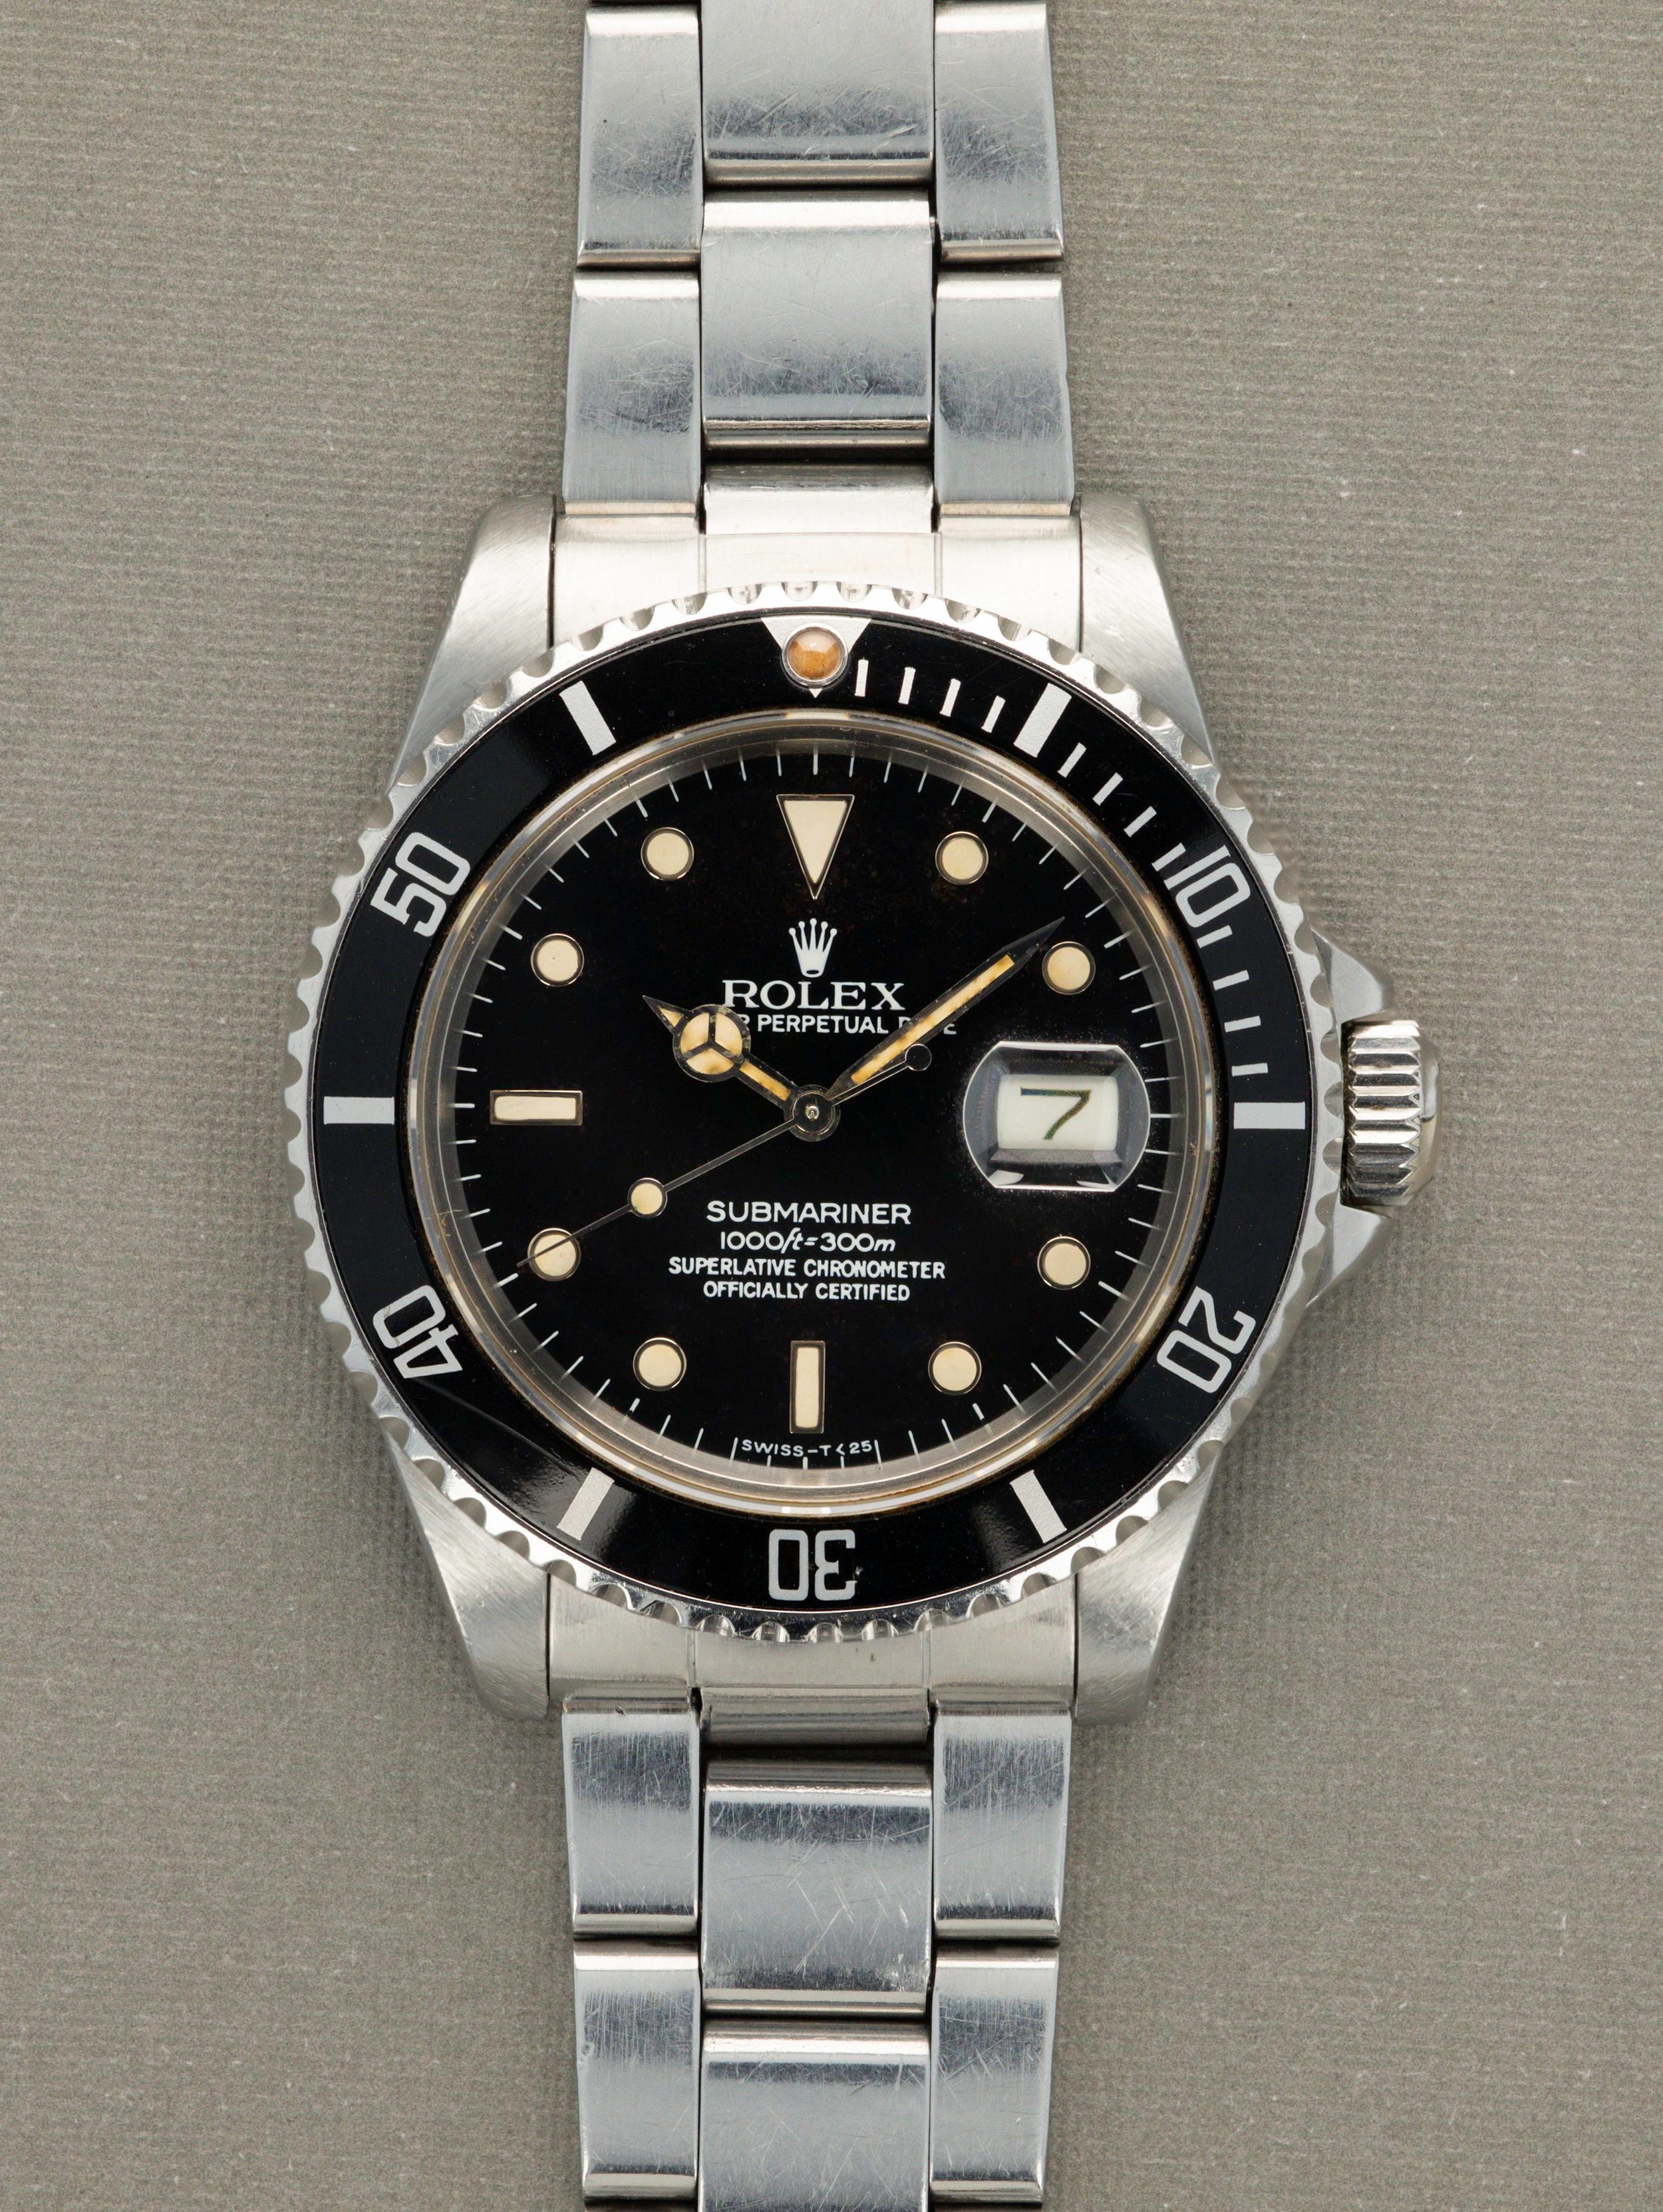 Rolex Submariner Date Ref. 16800 - Gloss Dial